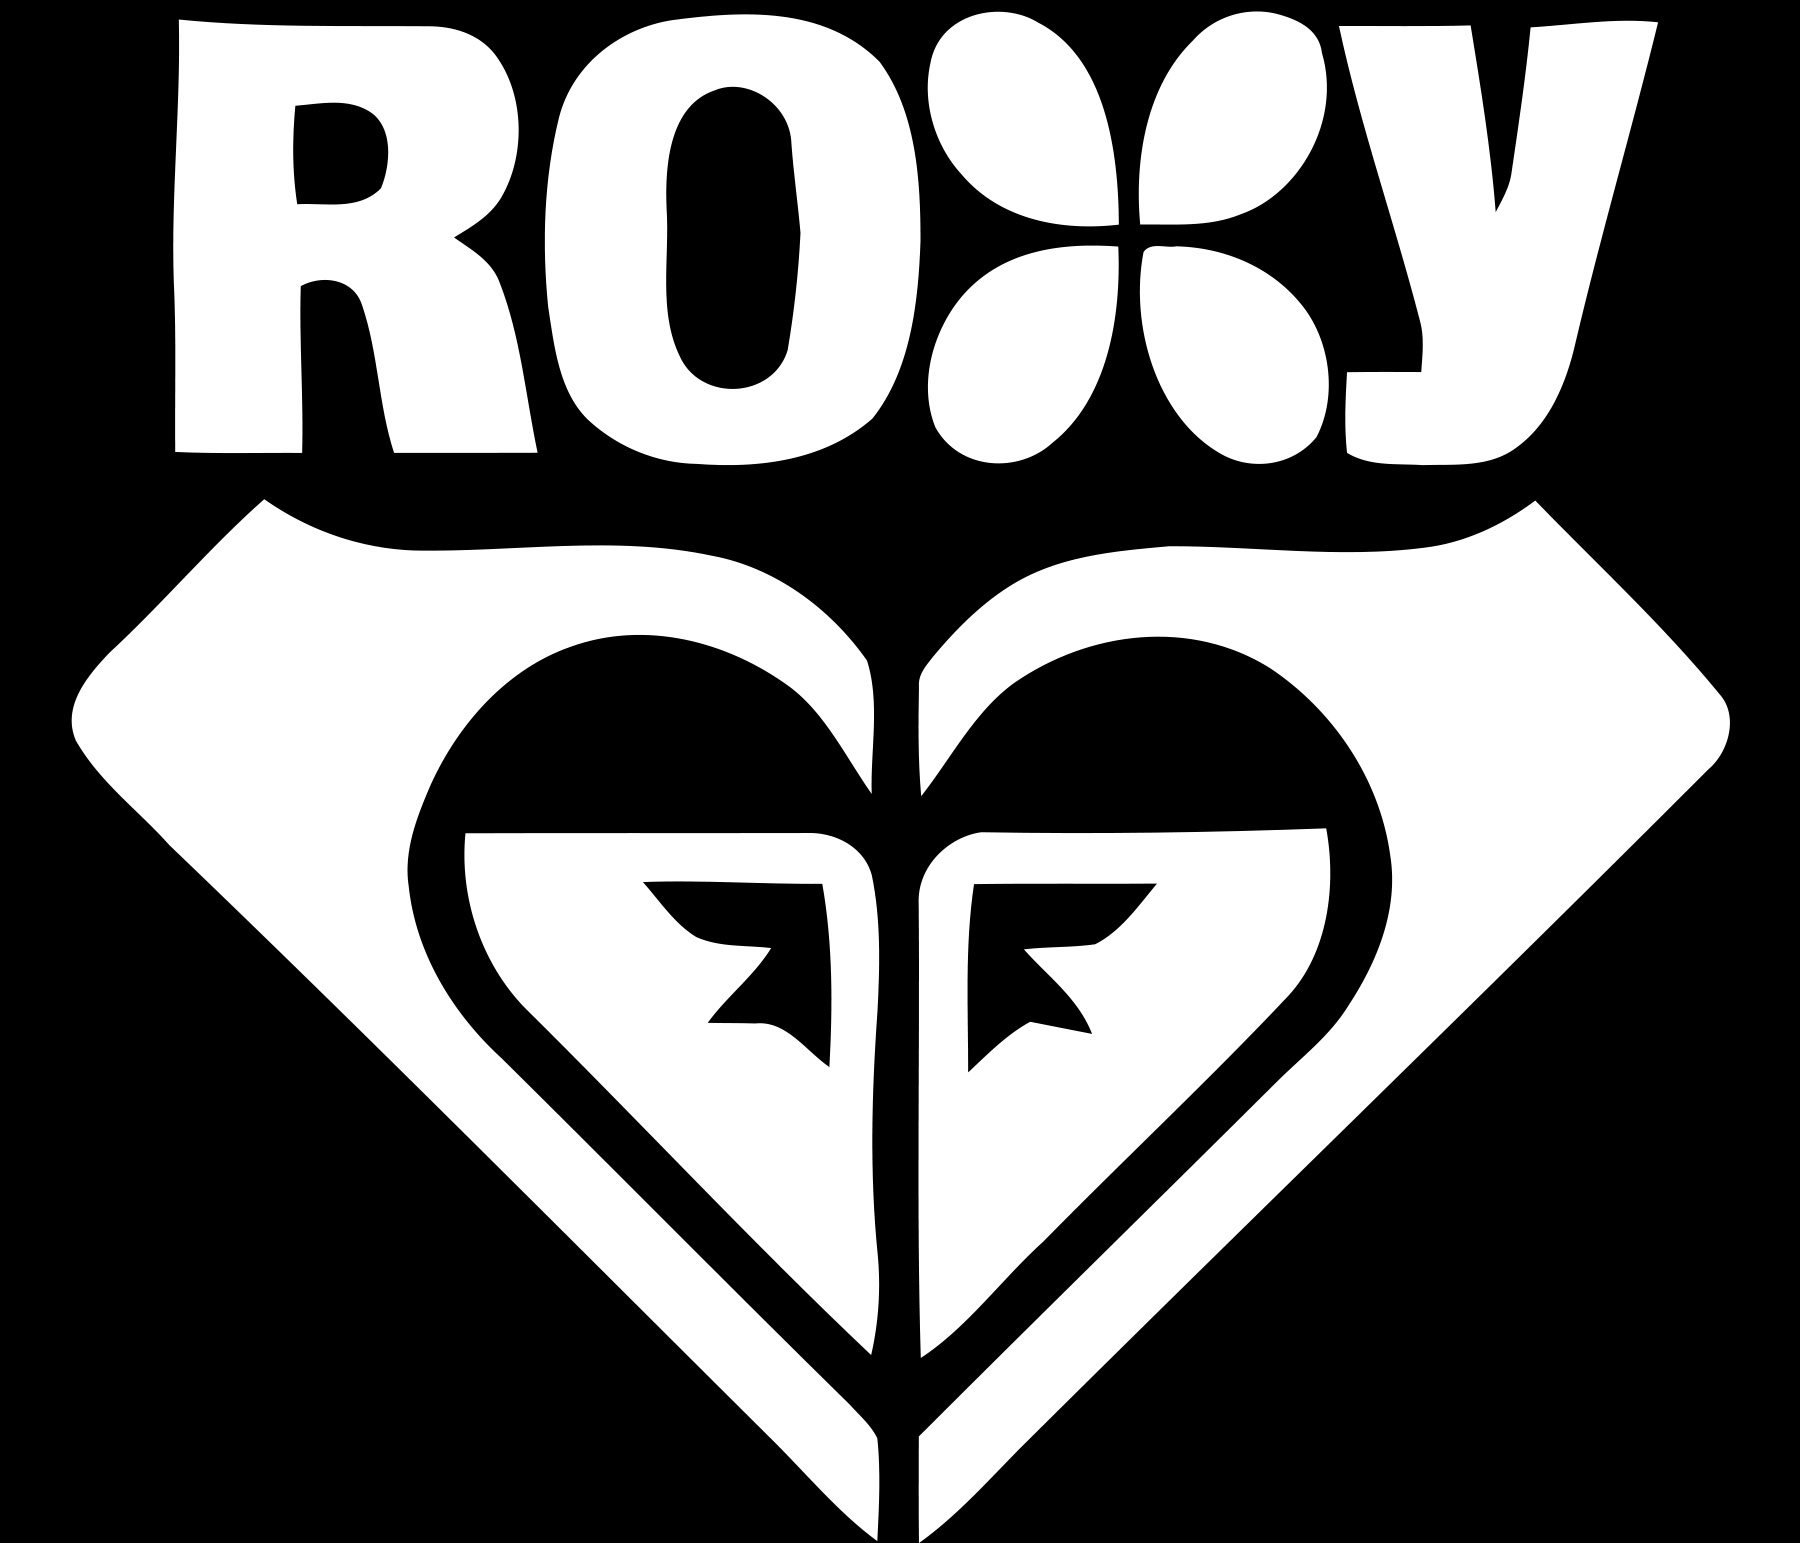 Meaning Roxy logo and symbol | history and evolution